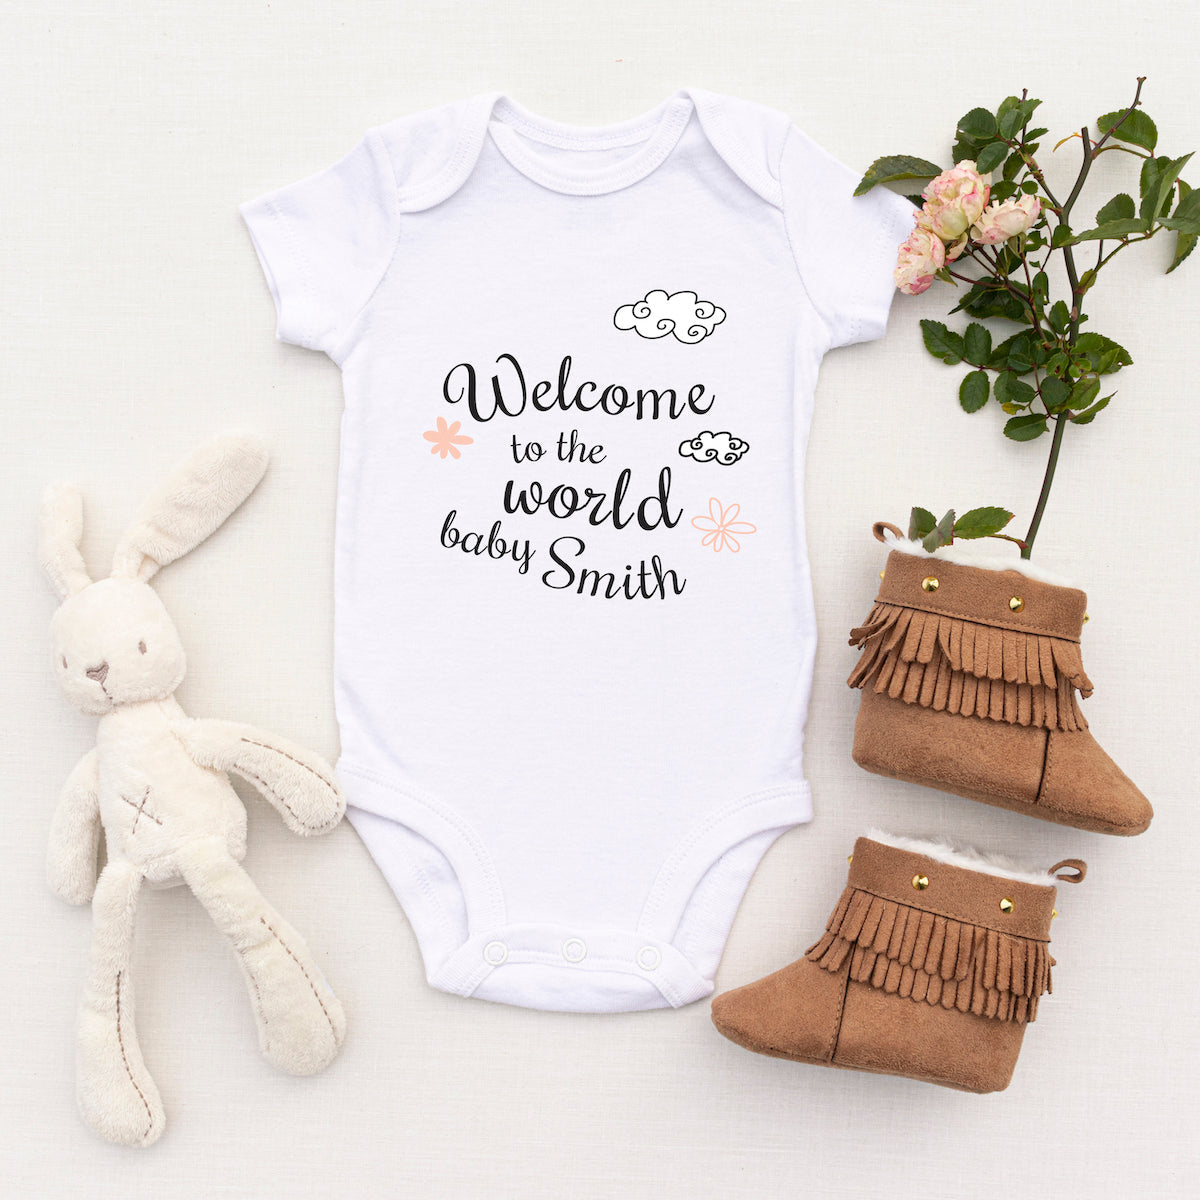 Personalised White Baby Body Suit Grow Vest - Clouds